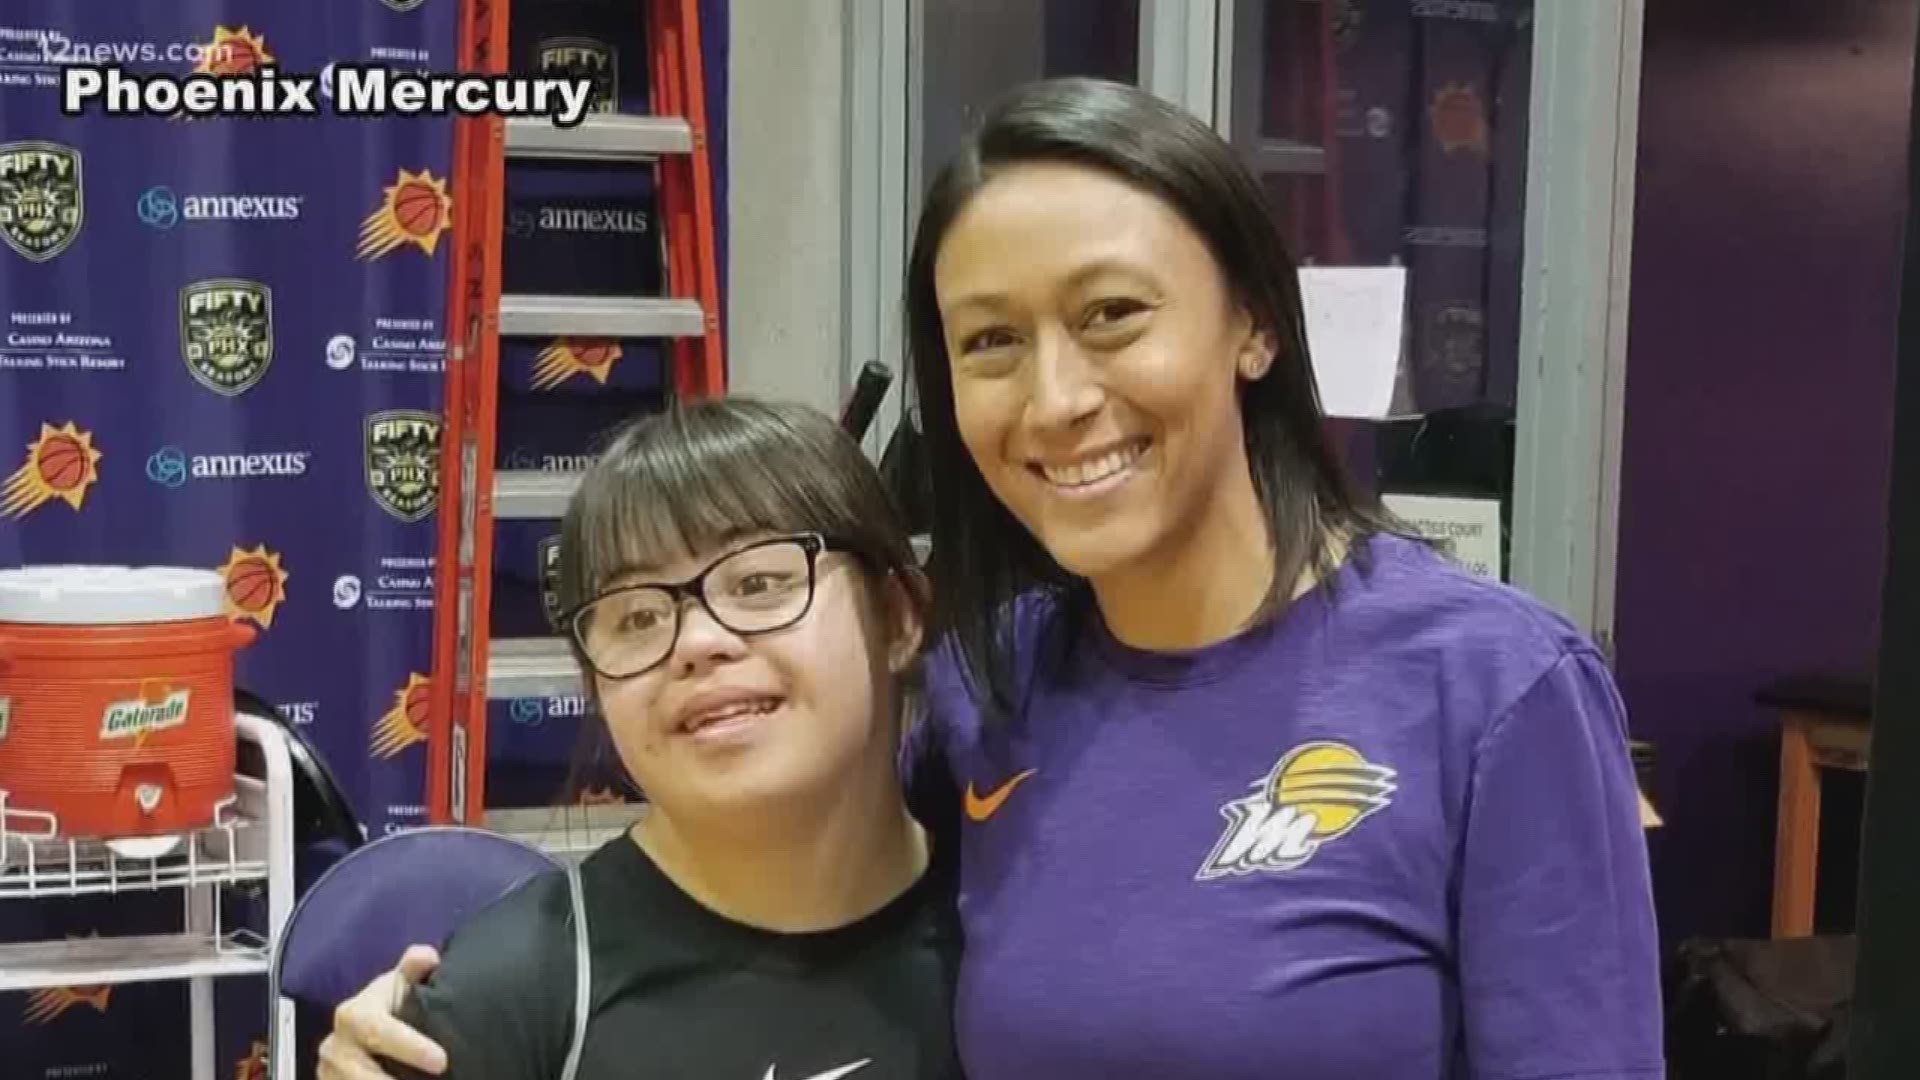 When the Phoenix Mercury caught wind of Alyna Macias' story, the team invited her to Phoenix for a day to shadow the team's equipment manager, Denise Romero.